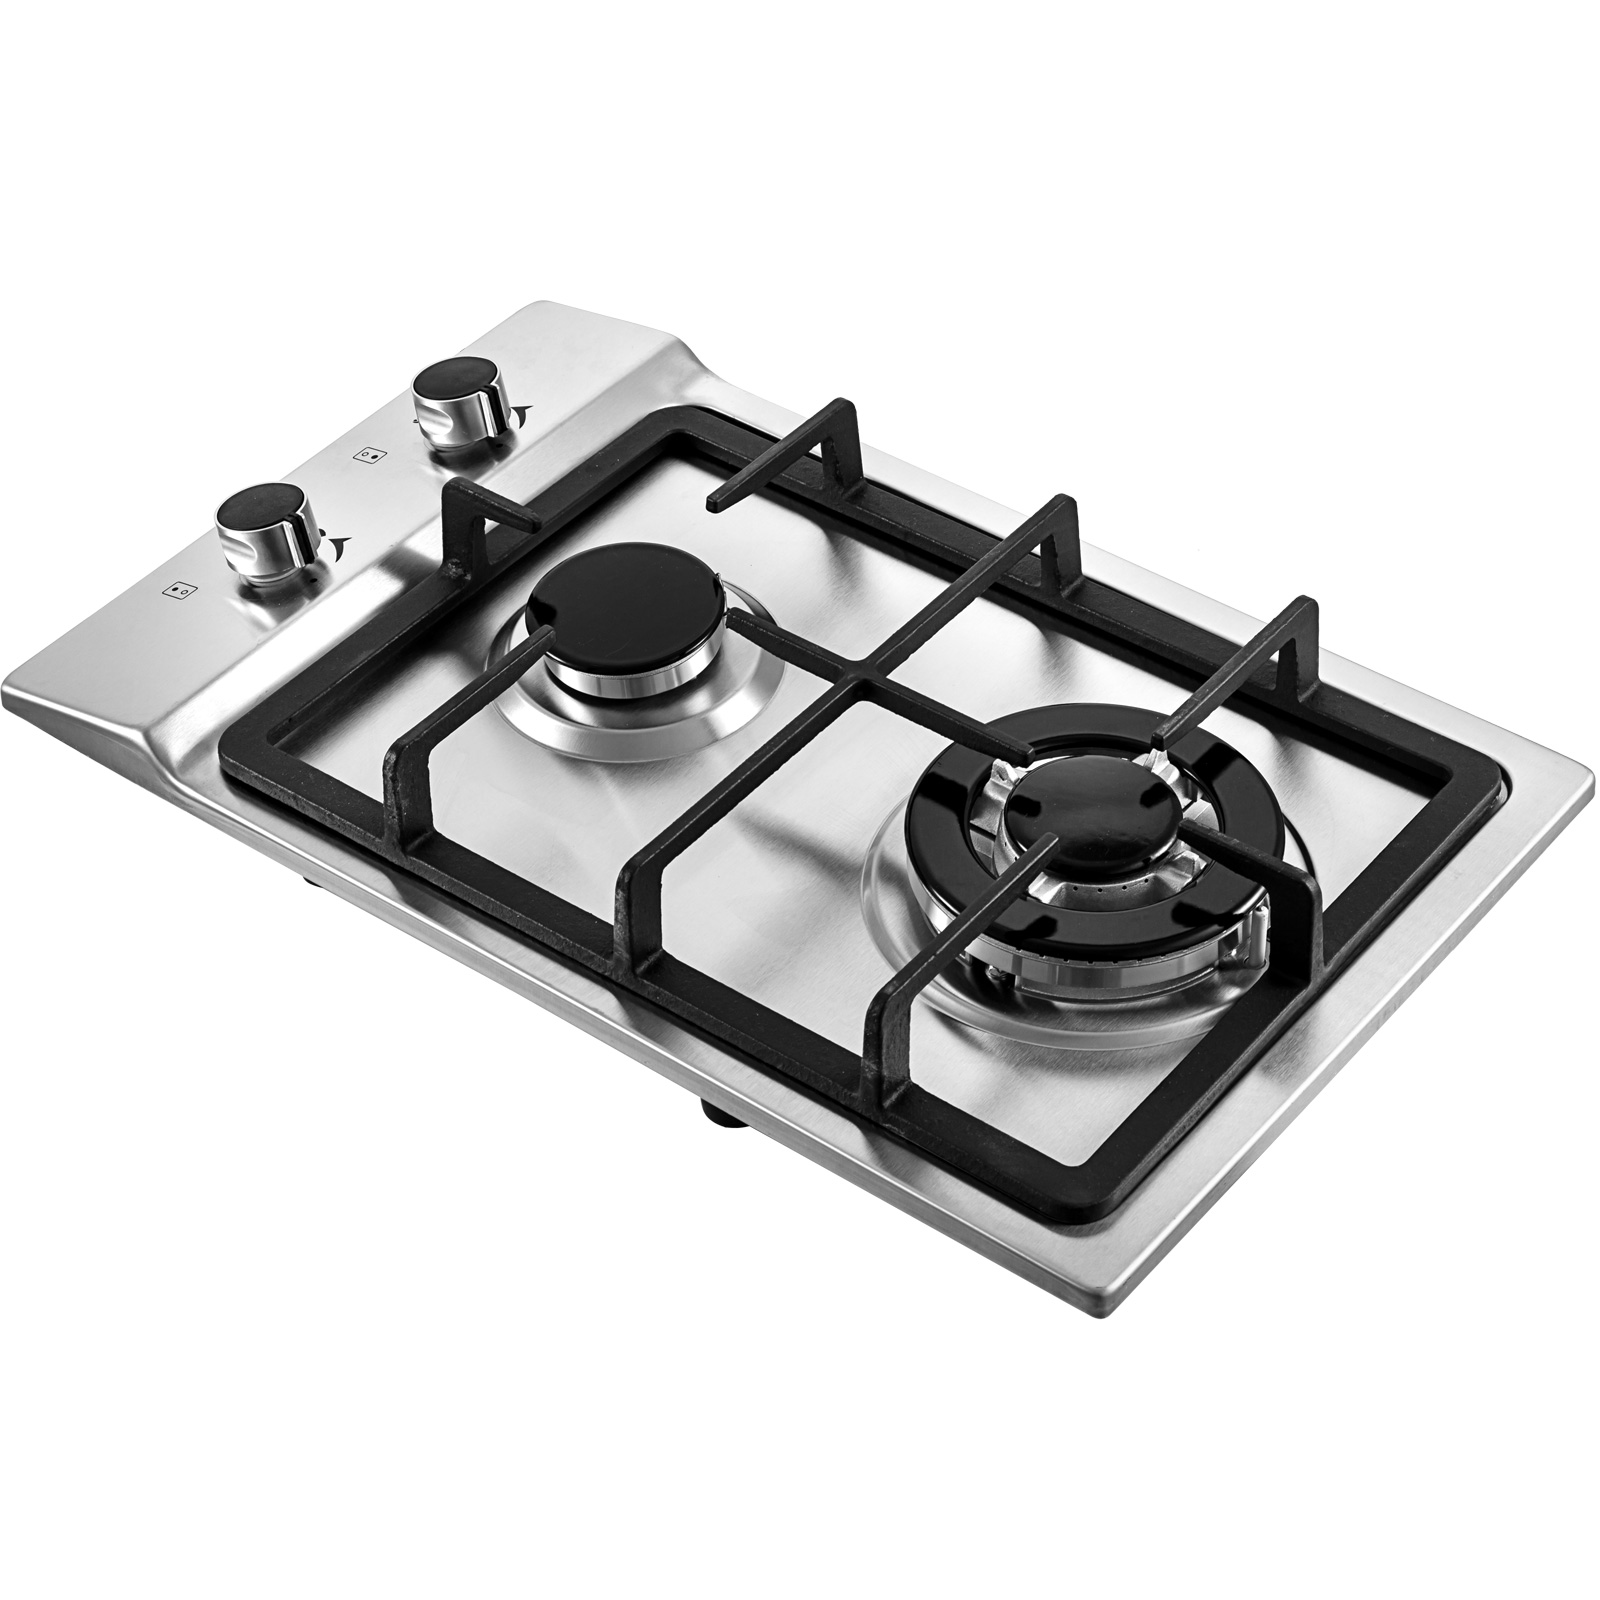  Two Burner Gas Stove for Small Space